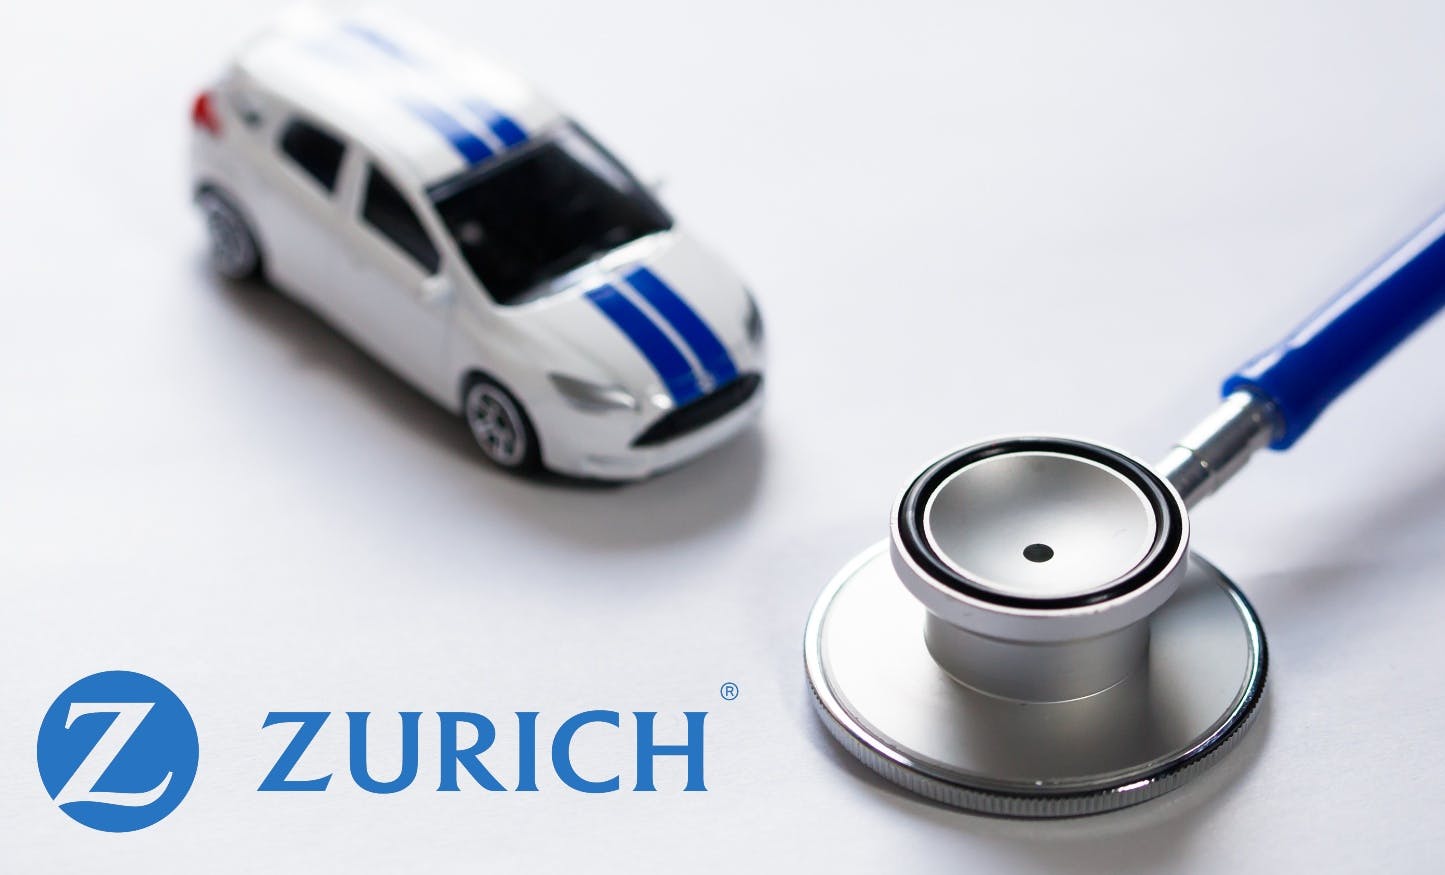 Zurich: A Look at Their Auto Warranty Options